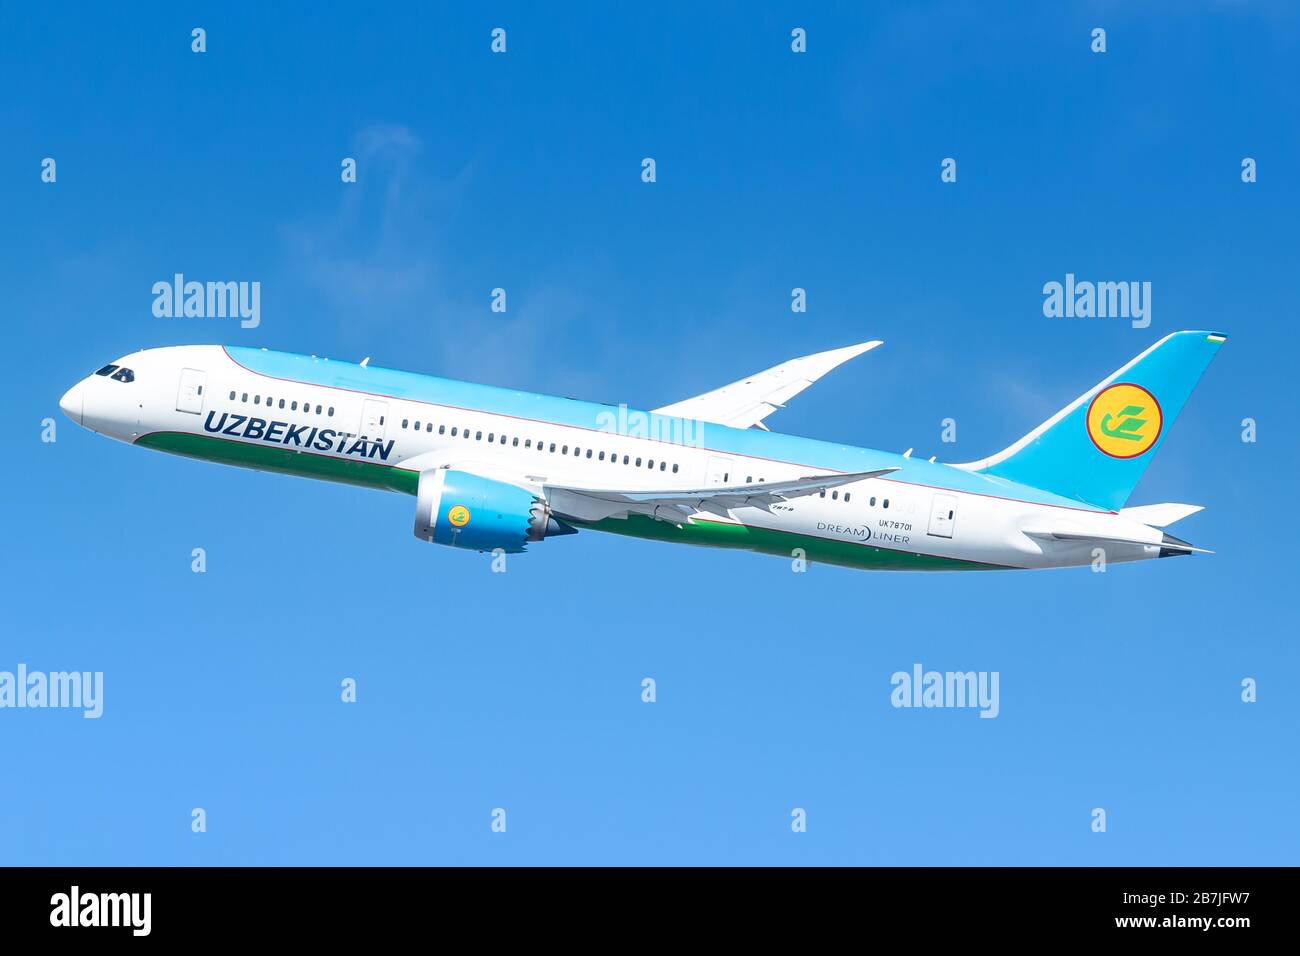 New York, USA - March 1, 2020: Uzbekistan Airways Boeing 787 Dreamliner airplane at New York John F. Kennedy airport (JFK) in the USA. Boeing is an ai Stock Photo